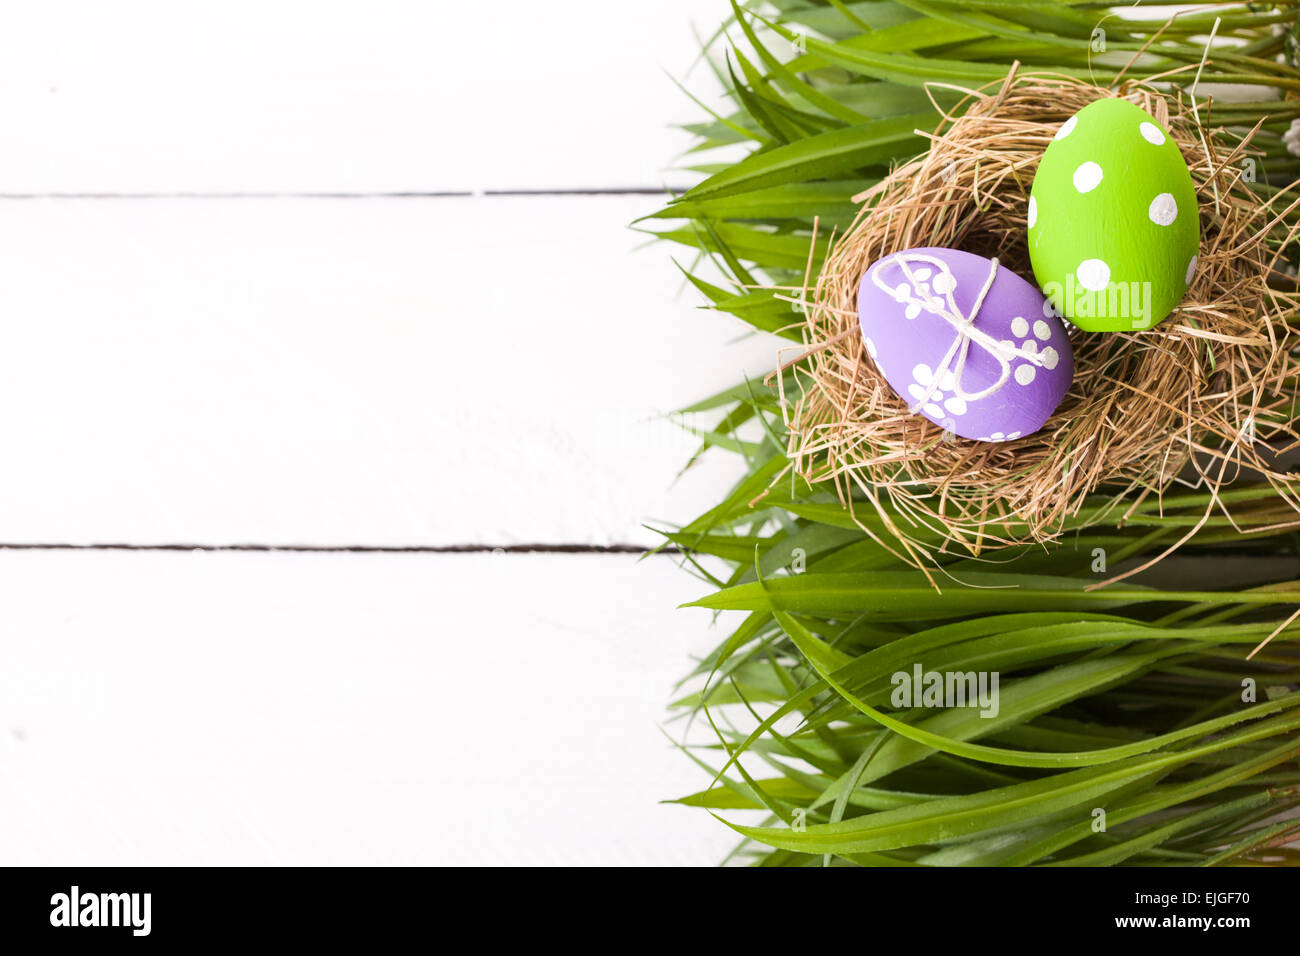 Colorful easter eggs with white points Stock Photo